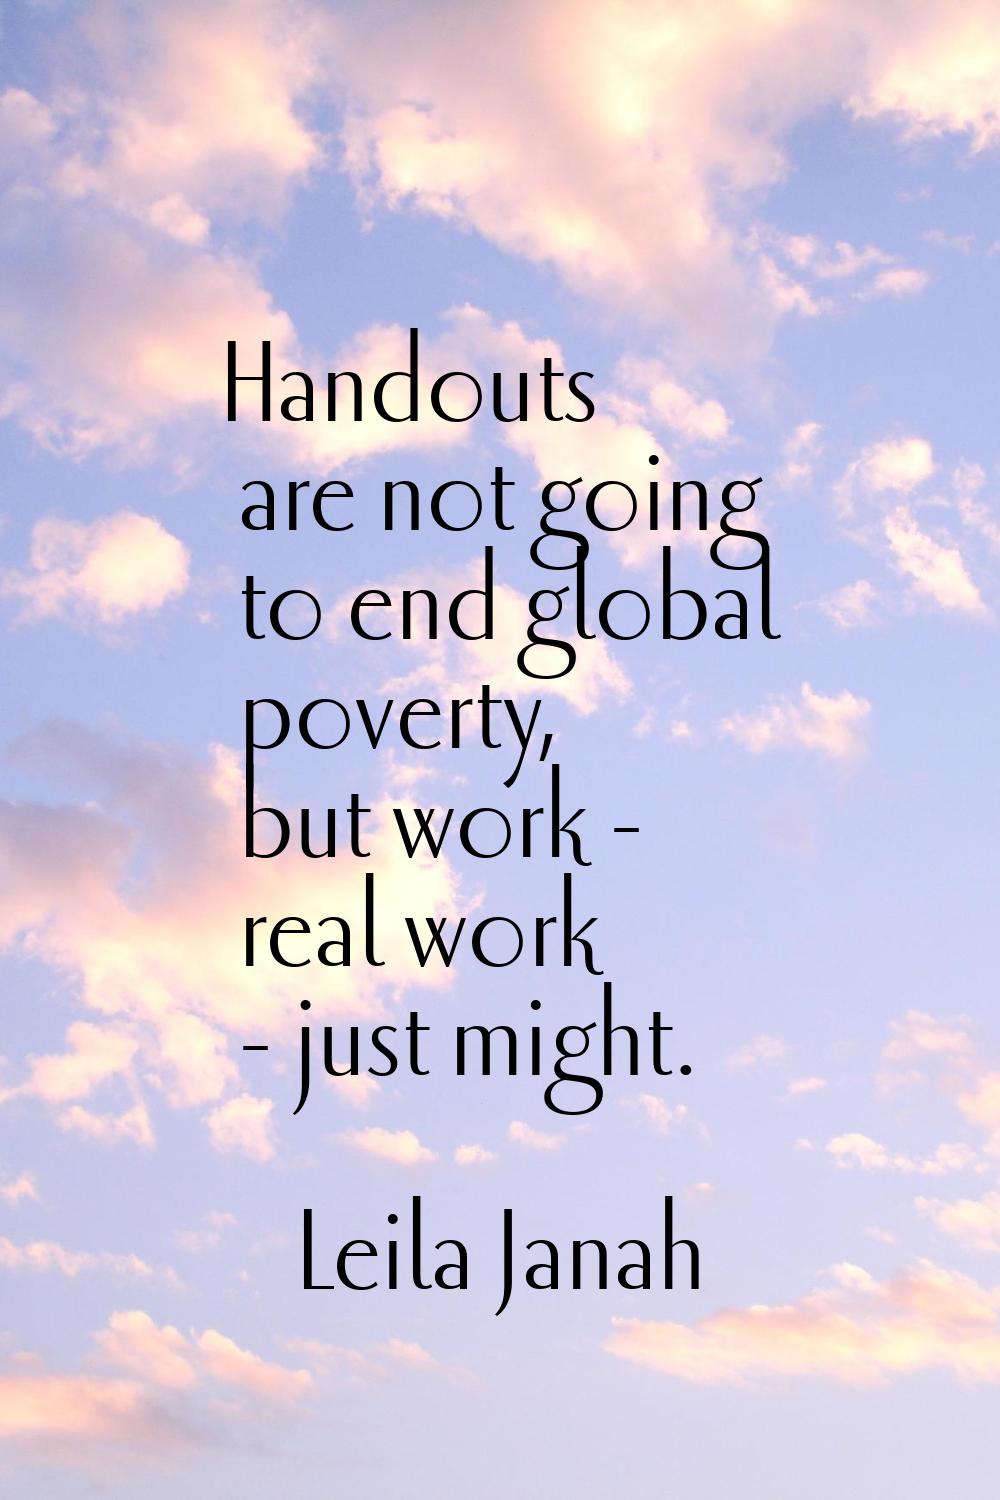 Handouts are not going to end global poverty, but work - real work - just might.